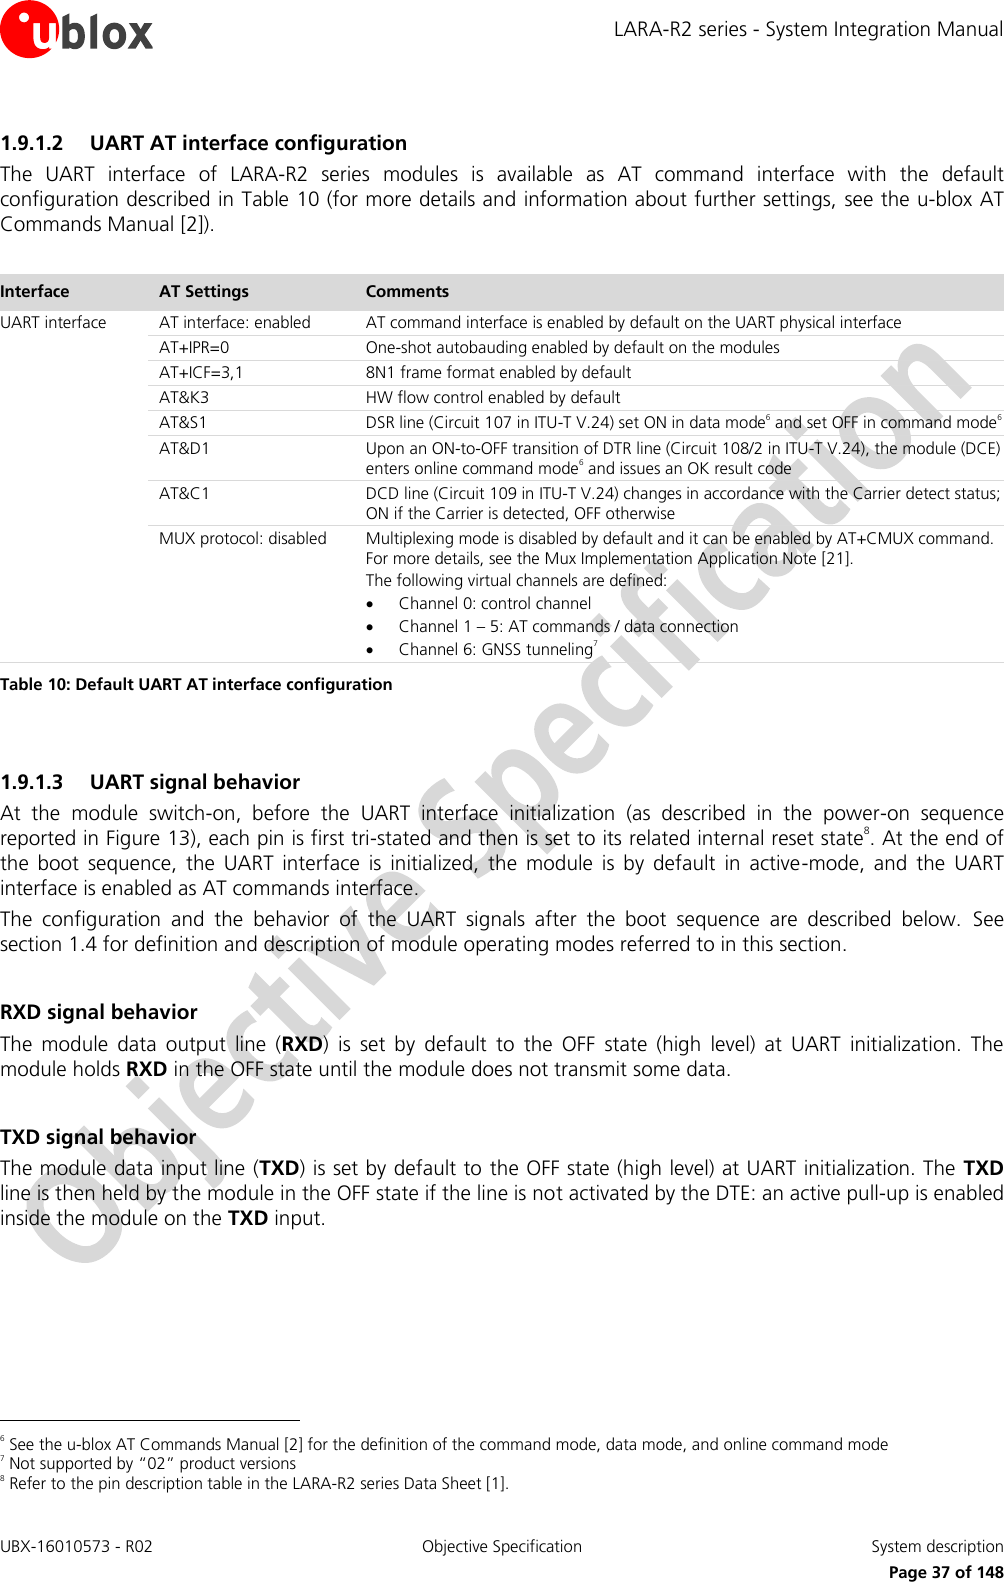 LARA-R2 series - System Integration Manual UBX-16010573 - R02  Objective Specification  System description     Page 37 of 148 1.9.1.2 UART AT interface configuration The  UART  interface  of  LARA-R2  series  modules  is  available  as  AT  command  interface  with  the  default configuration described in Table 10 (for more details and information about further settings, see the u-blox AT Commands Manual [2]).  Interface AT Settings Comments UART interface AT interface: enabled AT command interface is enabled by default on the UART physical interface AT+IPR=0 One-shot autobauding enabled by default on the modules AT+ICF=3,1 8N1 frame format enabled by default AT&amp;K3 HW flow control enabled by default AT&amp;S1 DSR line (Circuit 107 in ITU-T V.24) set ON in data mode6 and set OFF in command mode6 AT&amp;D1 Upon an ON-to-OFF transition of DTR line (Circuit 108/2 in ITU-T V.24), the module (DCE) enters online command mode6 and issues an OK result code AT&amp;C1 DCD line (Circuit 109 in ITU-T V.24) changes in accordance with the Carrier detect status; ON if the Carrier is detected, OFF otherwise MUX protocol: disabled Multiplexing mode is disabled by default and it can be enabled by AT+CMUX command. For more details, see the Mux Implementation Application Note [21]. The following virtual channels are defined:  Channel 0: control channel  Channel 1 – 5: AT commands / data connection  Channel 6: GNSS tunneling7 Table 10: Default UART AT interface configuration  1.9.1.3 UART signal behavior At  the  module  switch-on,  before  the  UART  interface  initialization  (as  described  in  the  power-on  sequence reported in Figure 13), each pin is first tri-stated and then is set to its related internal reset state8. At the end of the  boot  sequence,  the  UART  interface  is  initialized,  the  module  is  by  default  in  active-mode,  and  the  UART interface is enabled as AT commands interface. The  configuration  and  the  behavior  of  the  UART  signals  after  the  boot  sequence  are  described  below.  See section 1.4 for definition and description of module operating modes referred to in this section.  RXD signal behavior The  module  data  output  line  (RXD)  is  set  by  default  to  the  OFF  state  (high  level)  at  UART  initialization.  The module holds RXD in the OFF state until the module does not transmit some data.  TXD signal behavior The module data input line (TXD) is set by default to the OFF state (high level) at UART initialization. The TXD line is then held by the module in the OFF state if the line is not activated by the DTE: an active pull-up is enabled inside the module on the TXD input.                                                        6 See the u-blox AT Commands Manual [2] for the definition of the command mode, data mode, and online command mode 7 Not supported by “02” product versions 8 Refer to the pin description table in the LARA-R2 series Data Sheet [1]. 